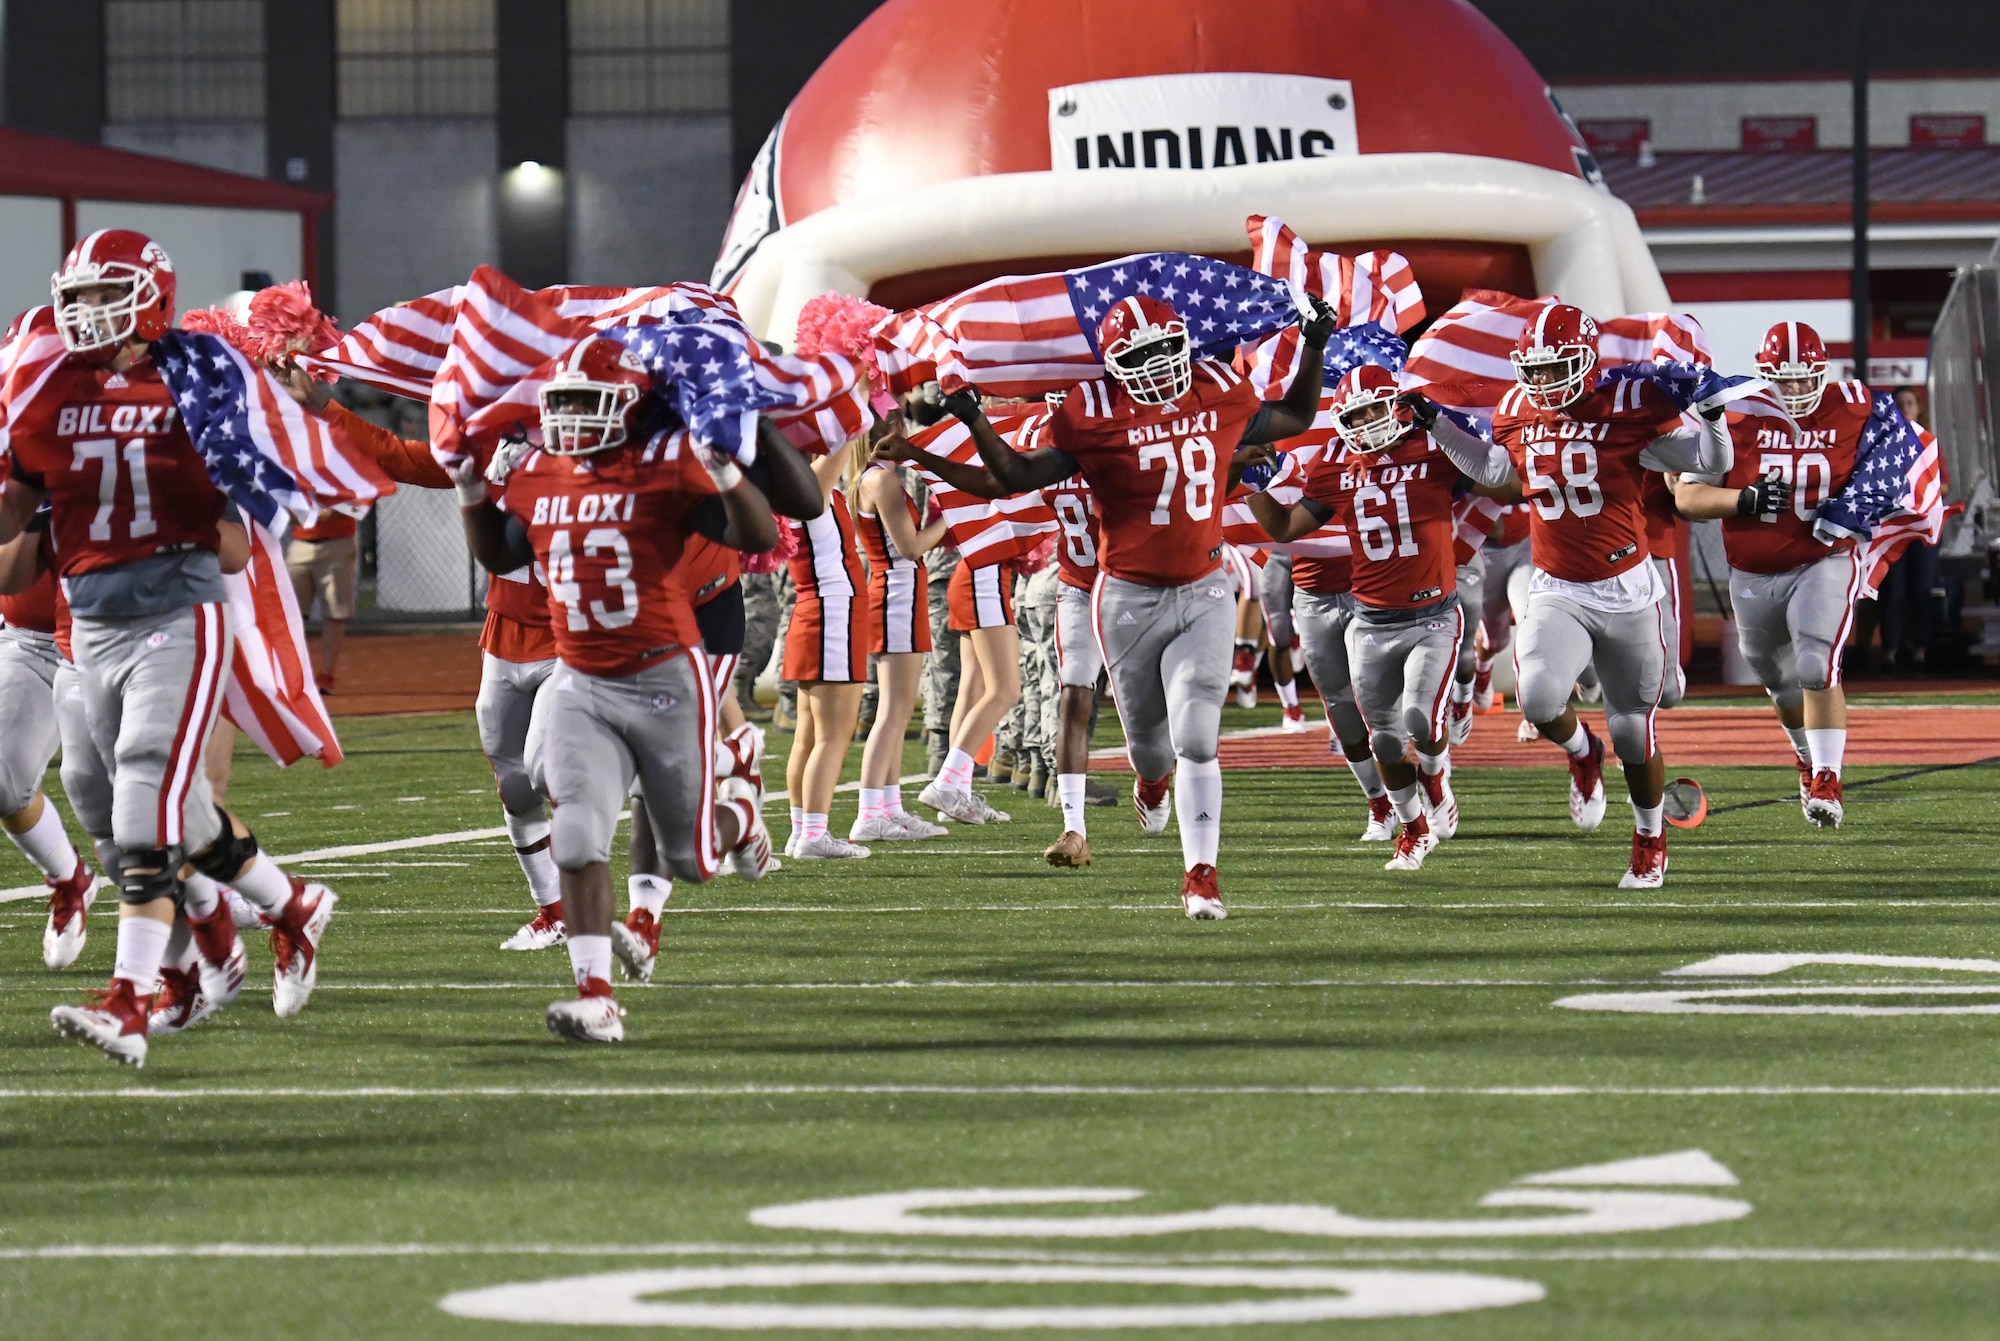 Members of the Biloxi High School Football Team run onto the field carrying U.S Flags during the Biloxi High School military appreciation night football game in Biloxi, Mississippi, Oct. 5, 2018. Keesler personnel also participated in holding the U.S. Flag during the playing of the national anthem and the coin toss to determine which team would receive the ball first. (U.S. Air Force photo by Kemberly Groue)